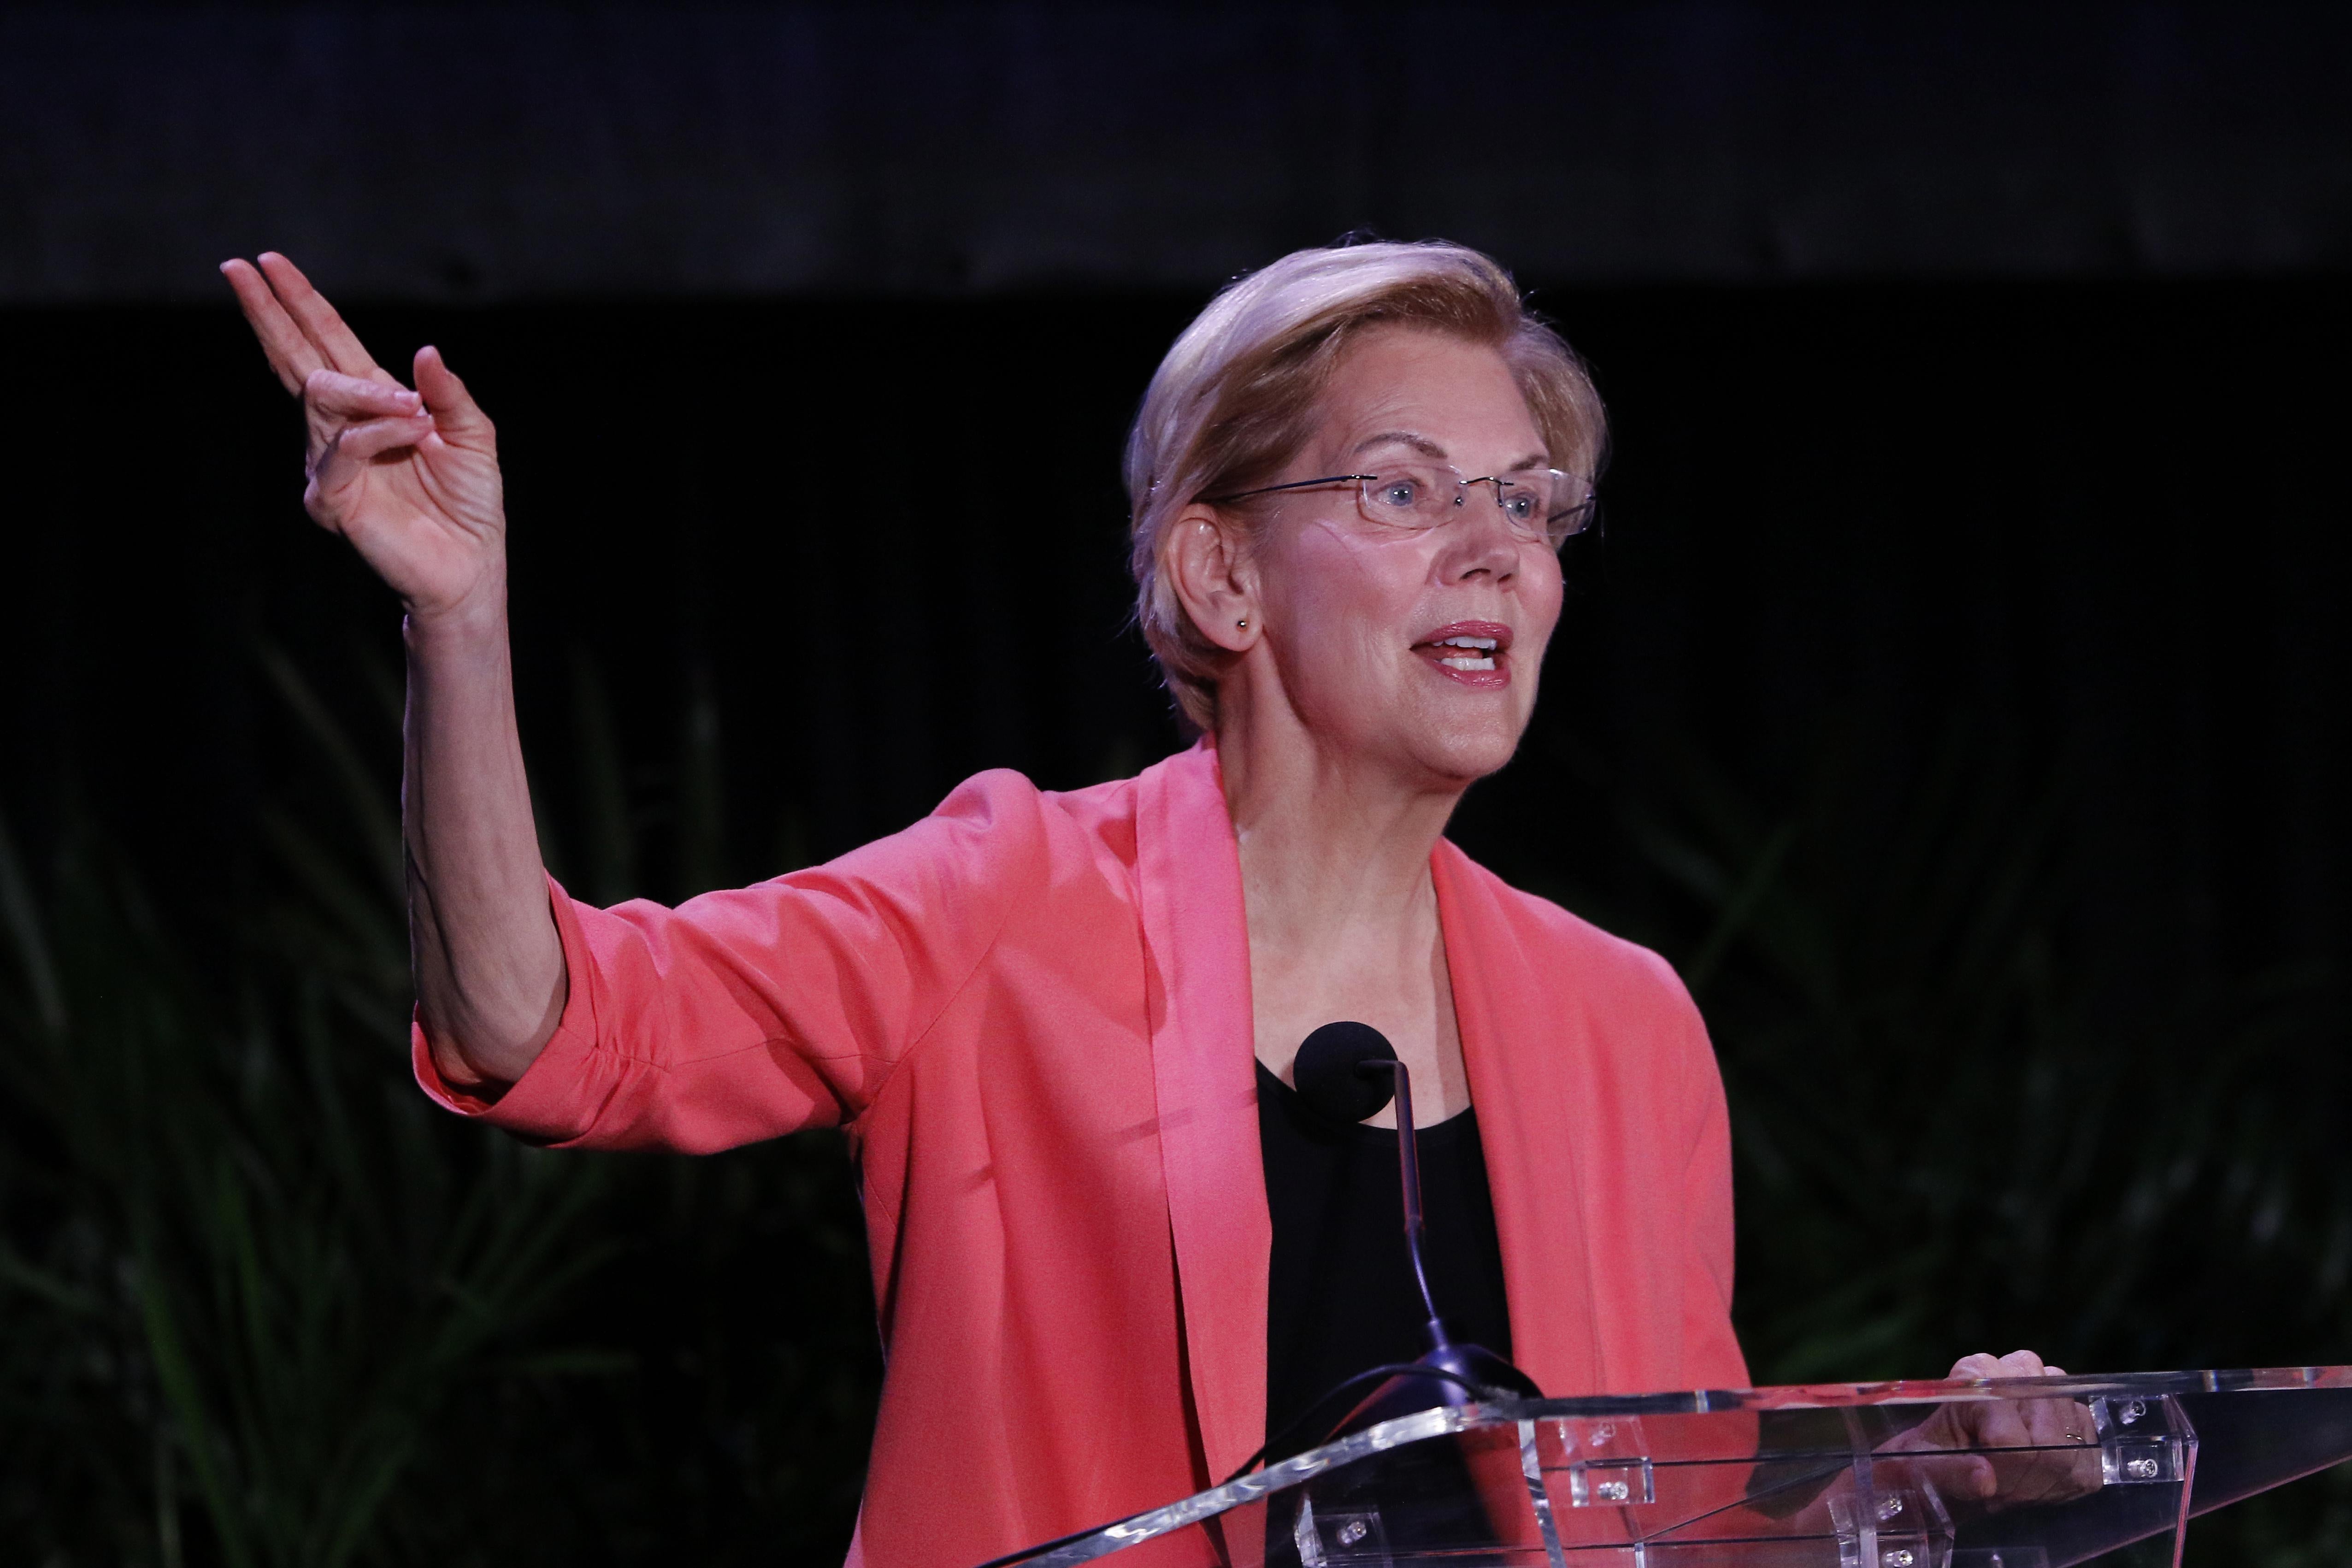 Warren speaks at a podium during the NALEO Presidential Candidate Forum in Miami on June 21.